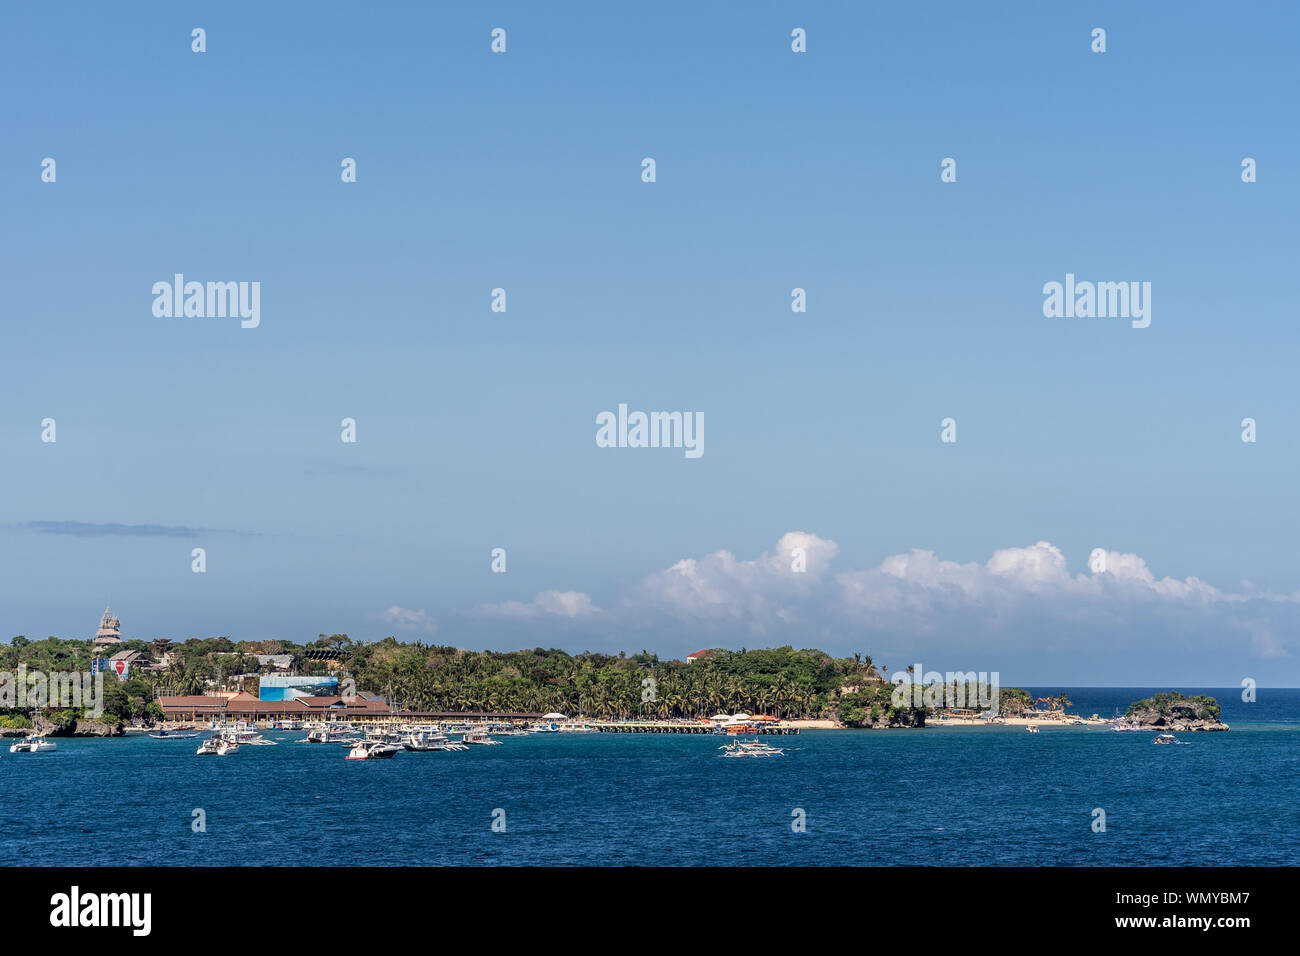 Manoc-Manoc, Boracay, Philippines - March 4, 2019: Wide shot from sea of Cagban Jetty Port with tens of small boats. Dark blue see in front, green ban Stock Photo